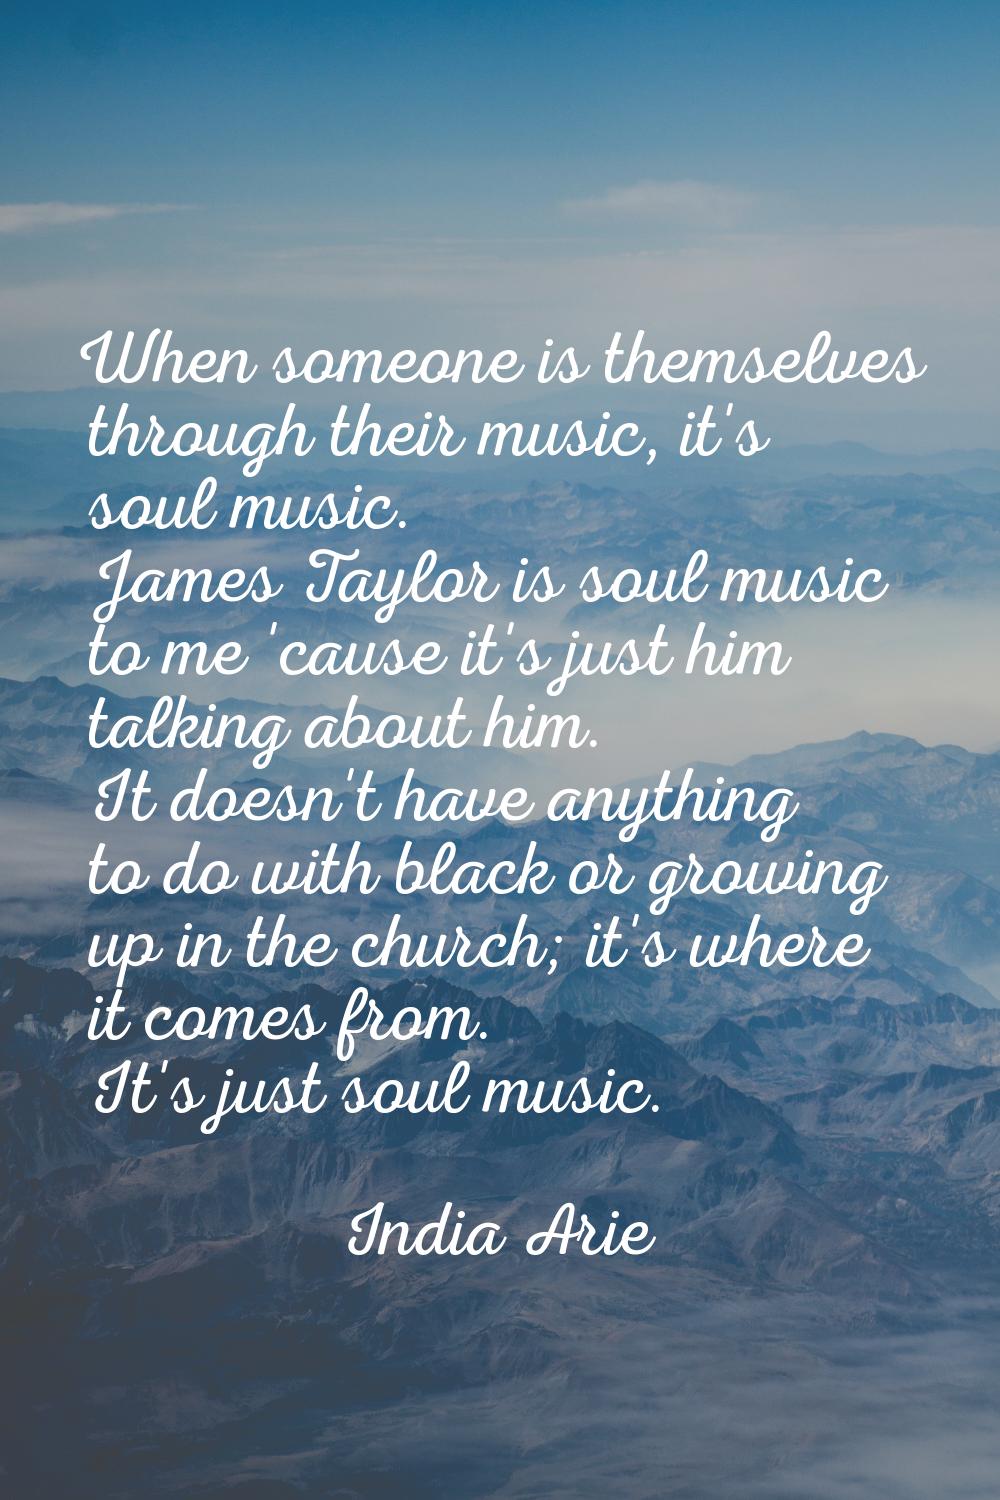 When someone is themselves through their music, it's soul music. James Taylor is soul music to me '